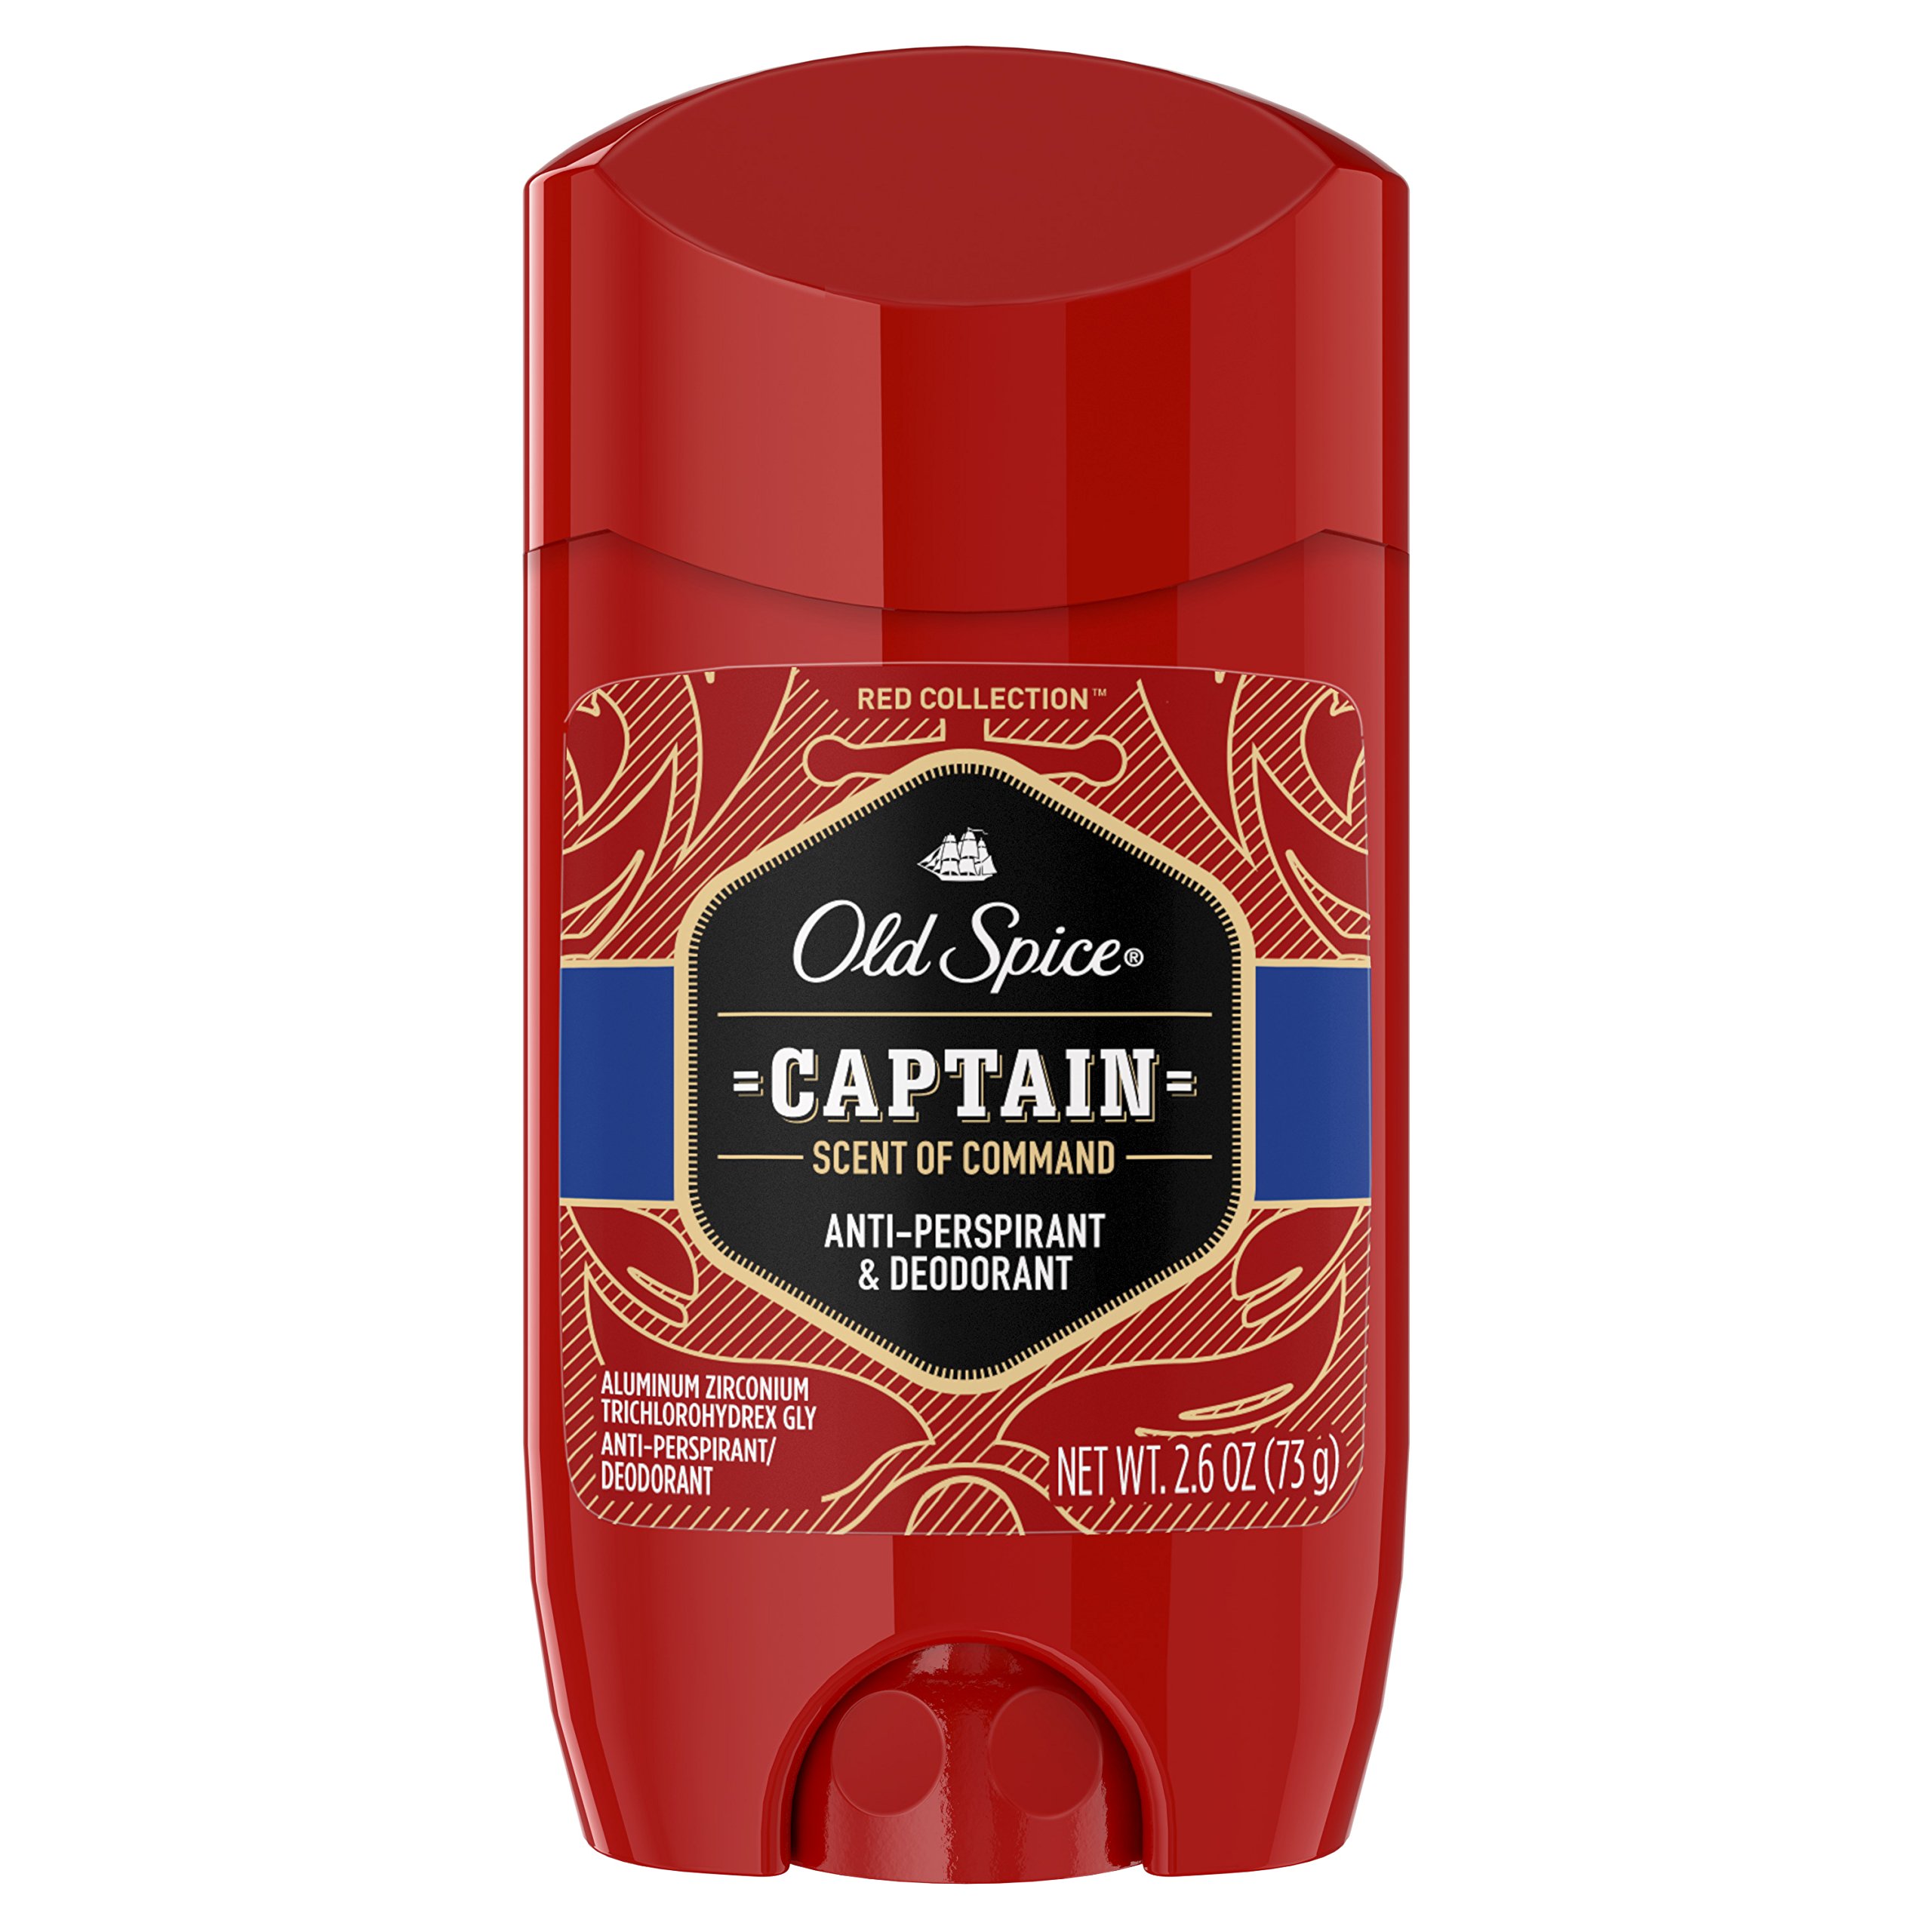 Old Spice Red Men's Antiperspirant/Deodorant Invisible Solid Collection, Captain, 2.6 oz